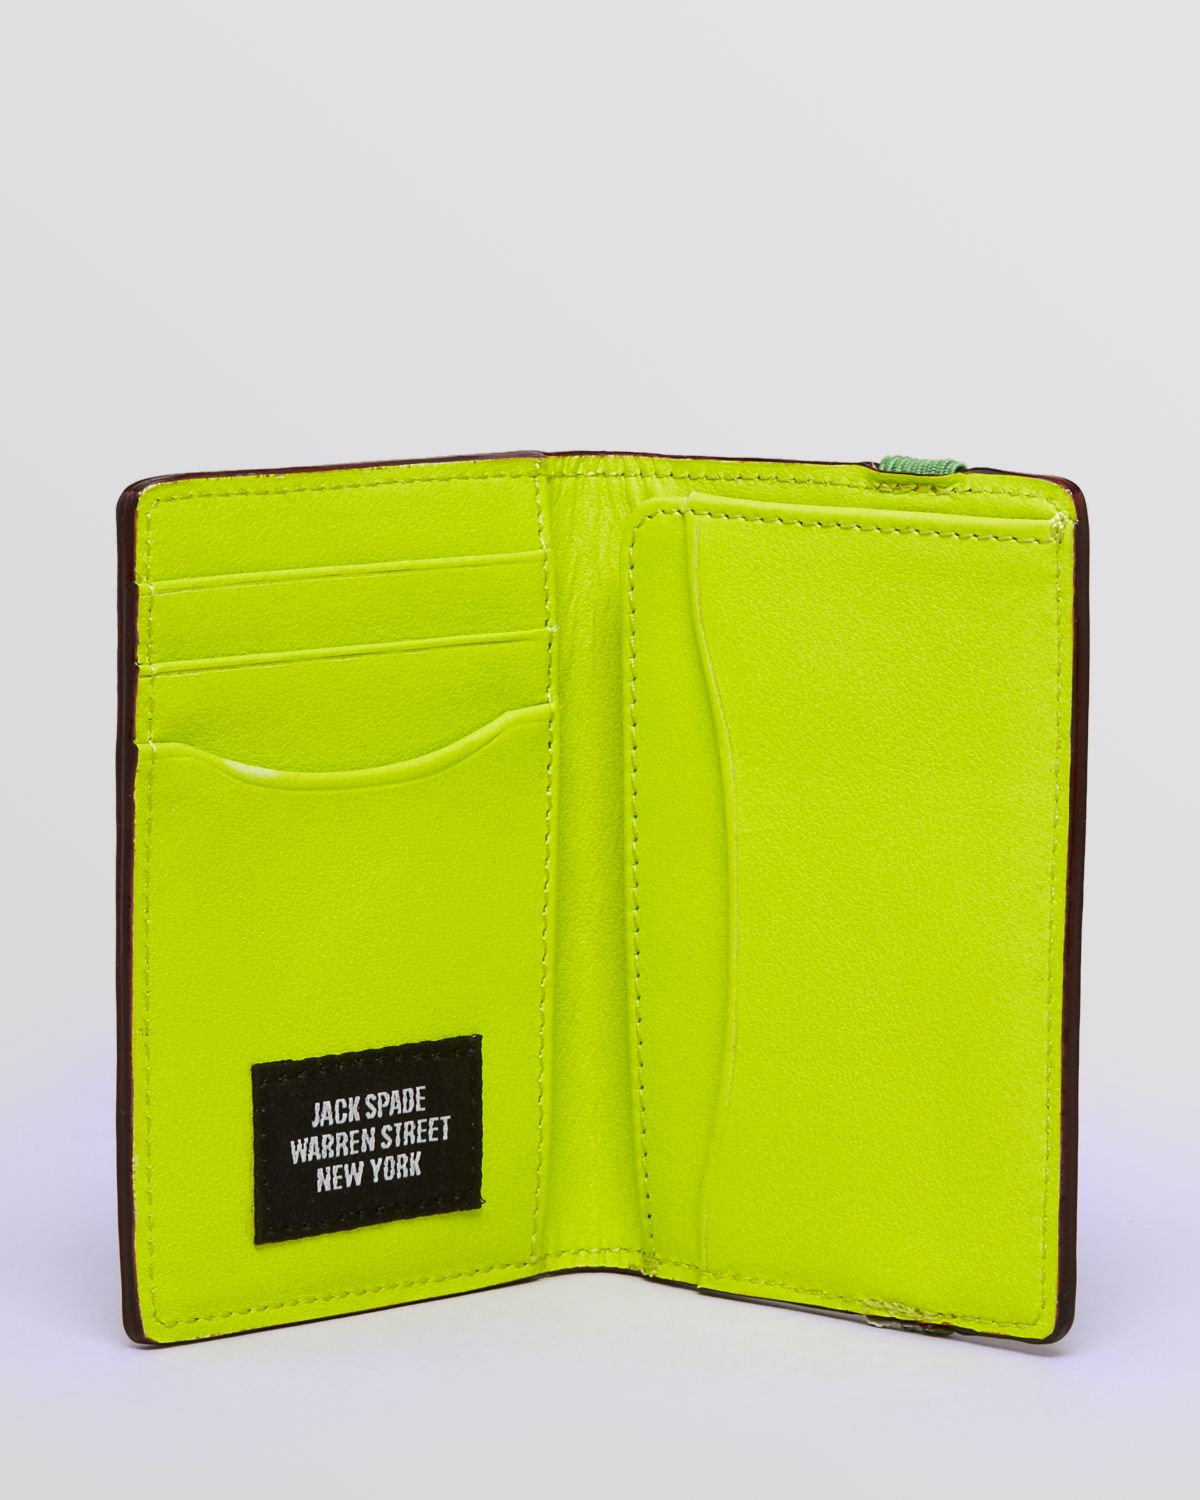 Jack Spade Leather Vertical Bifold Wallet in Lime/Green (Green) for Men - Lyst